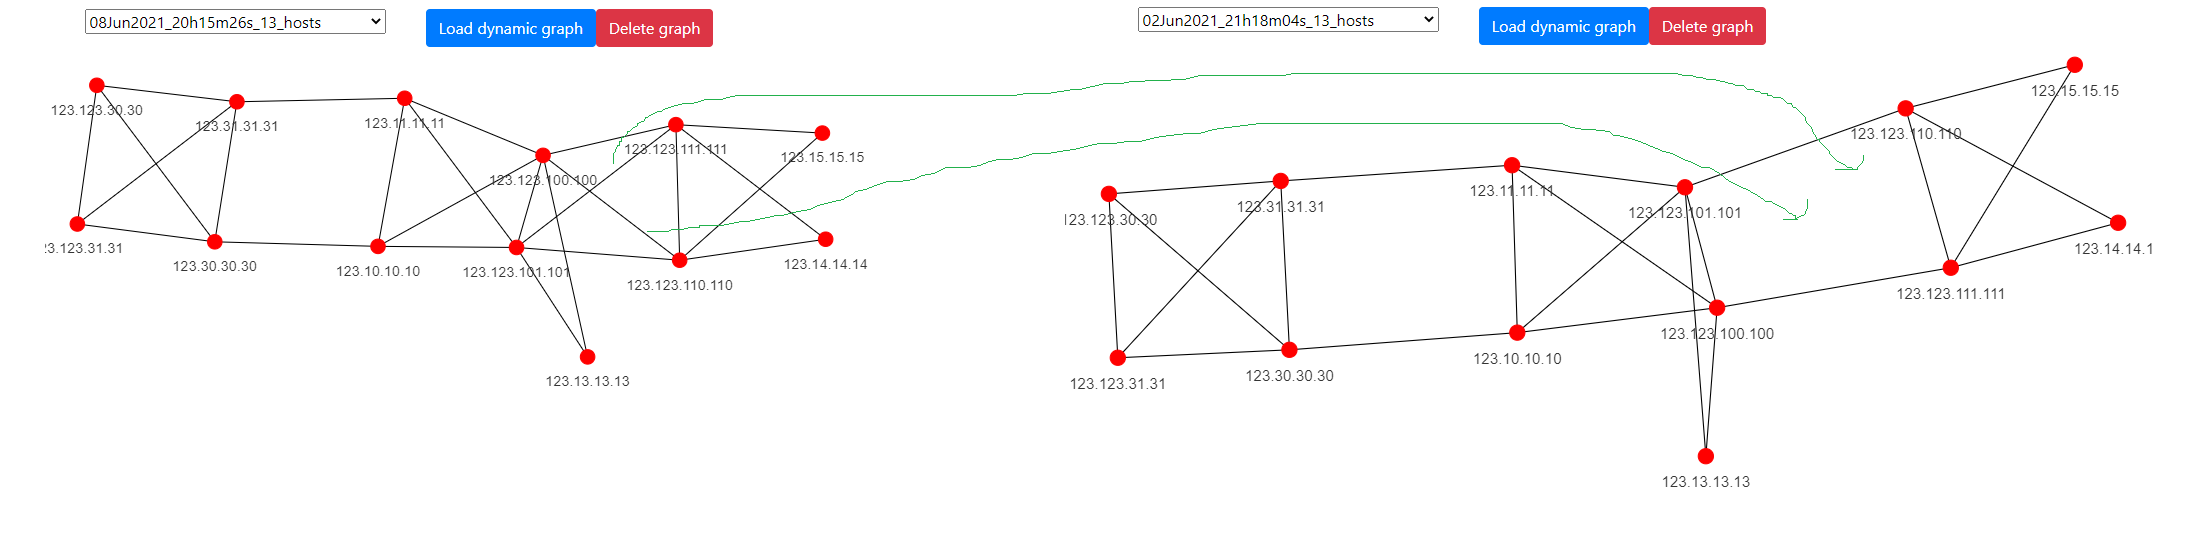 Topolograph ospf state diff